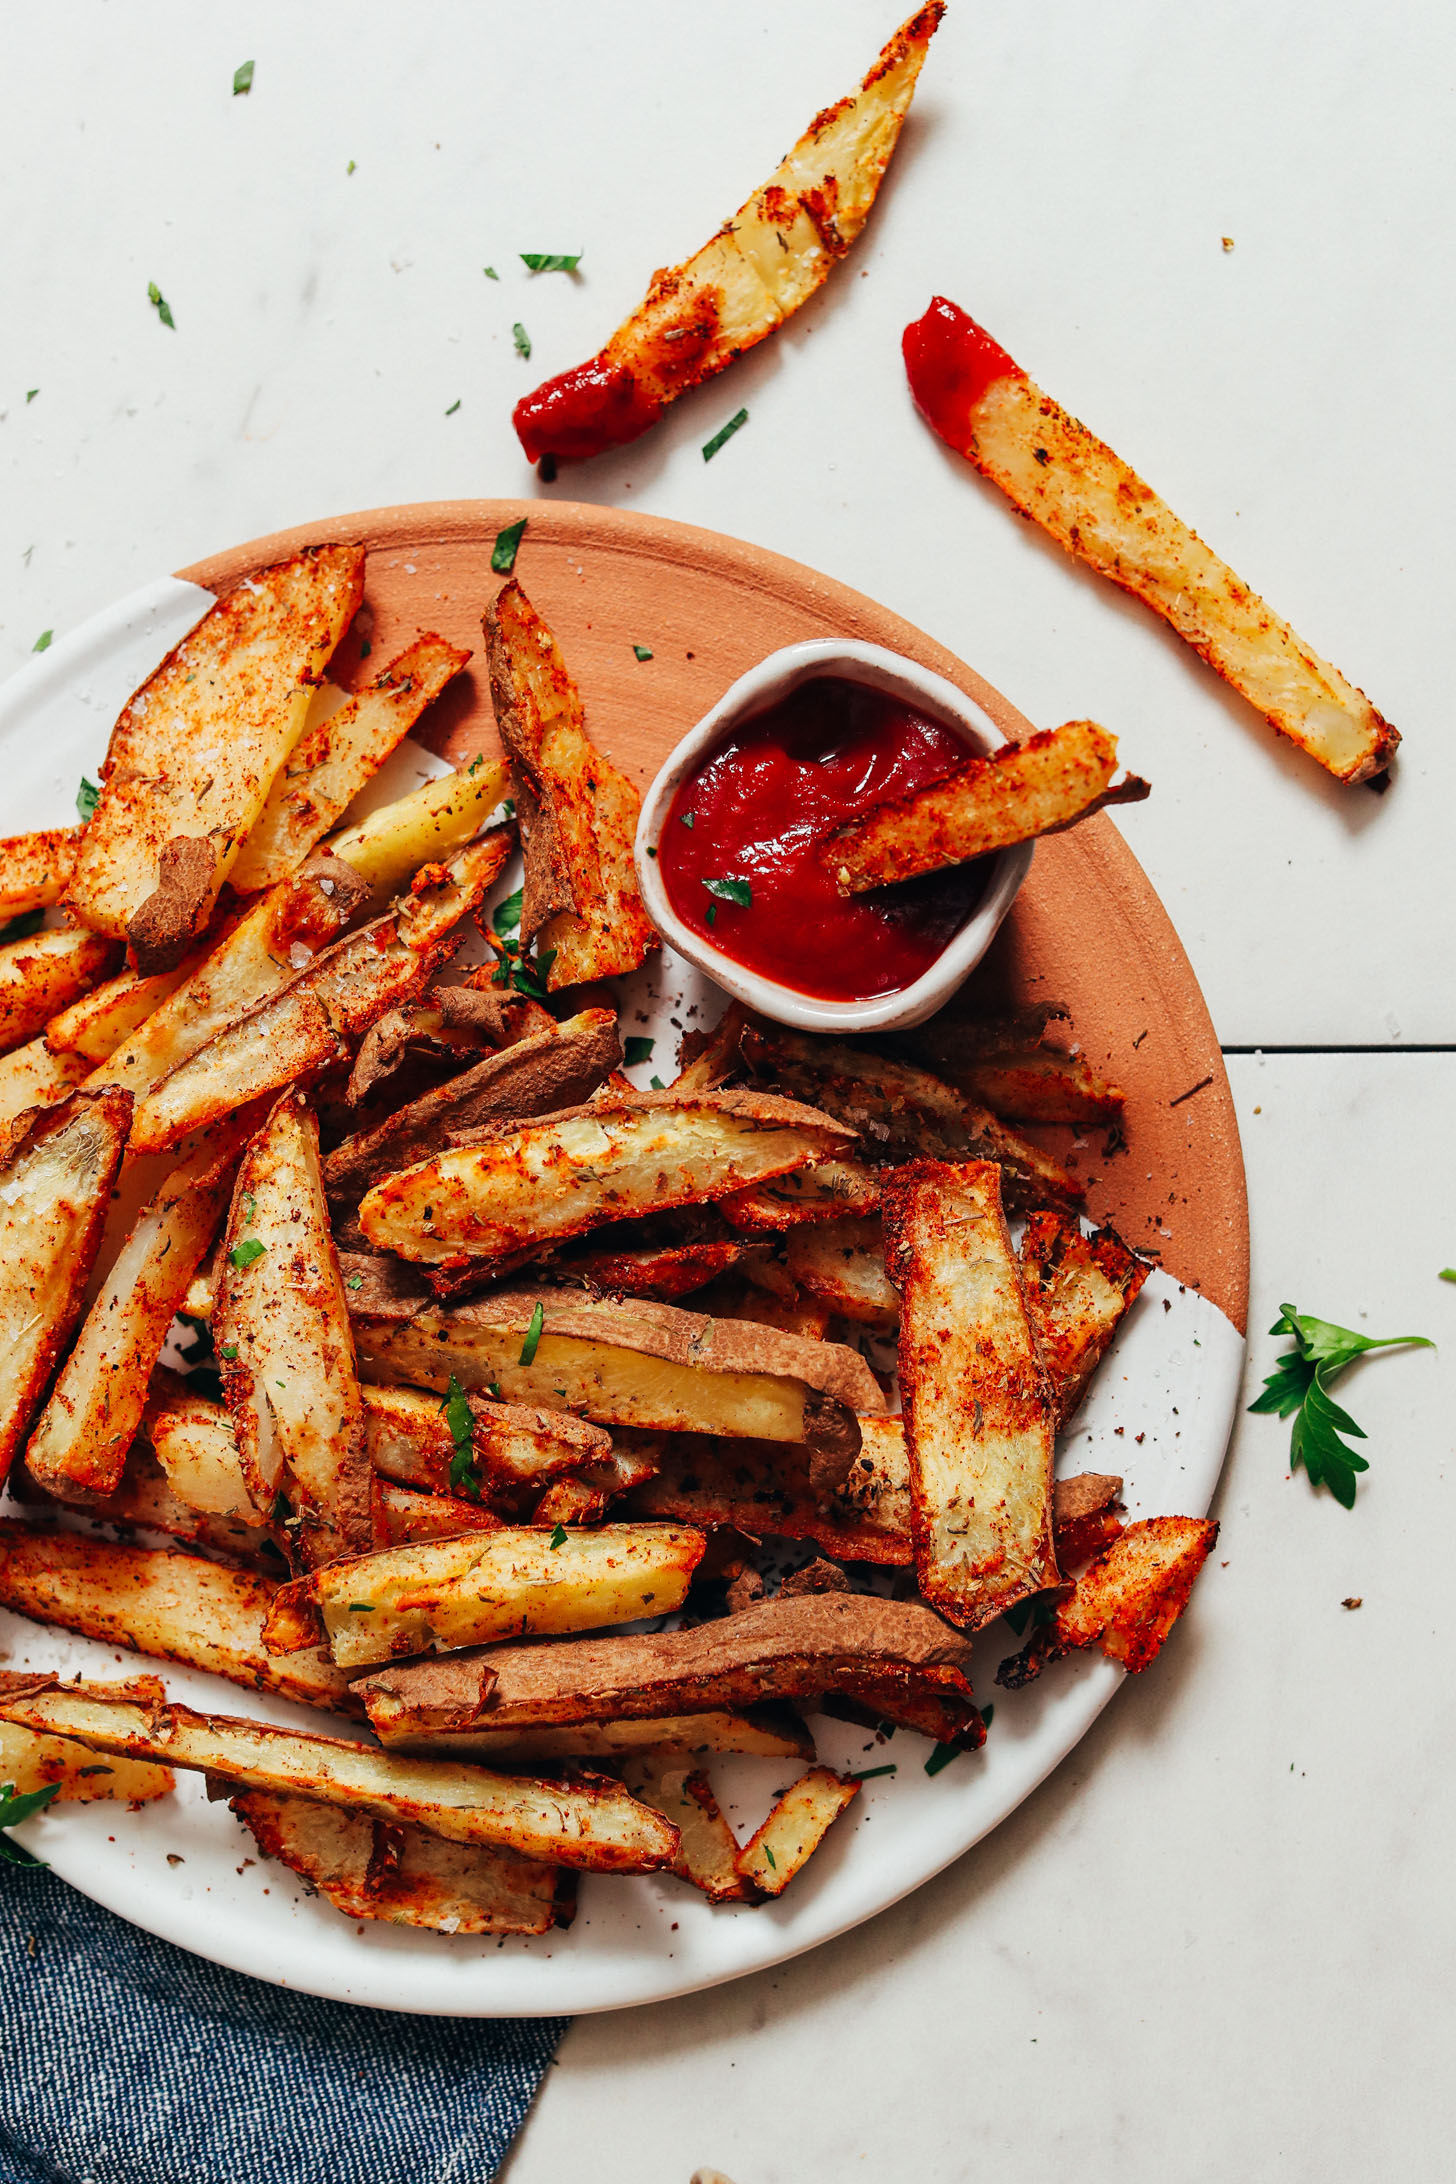 Tray of Oil-Free Cajun Baked Fries with ketchup and fresh parsley